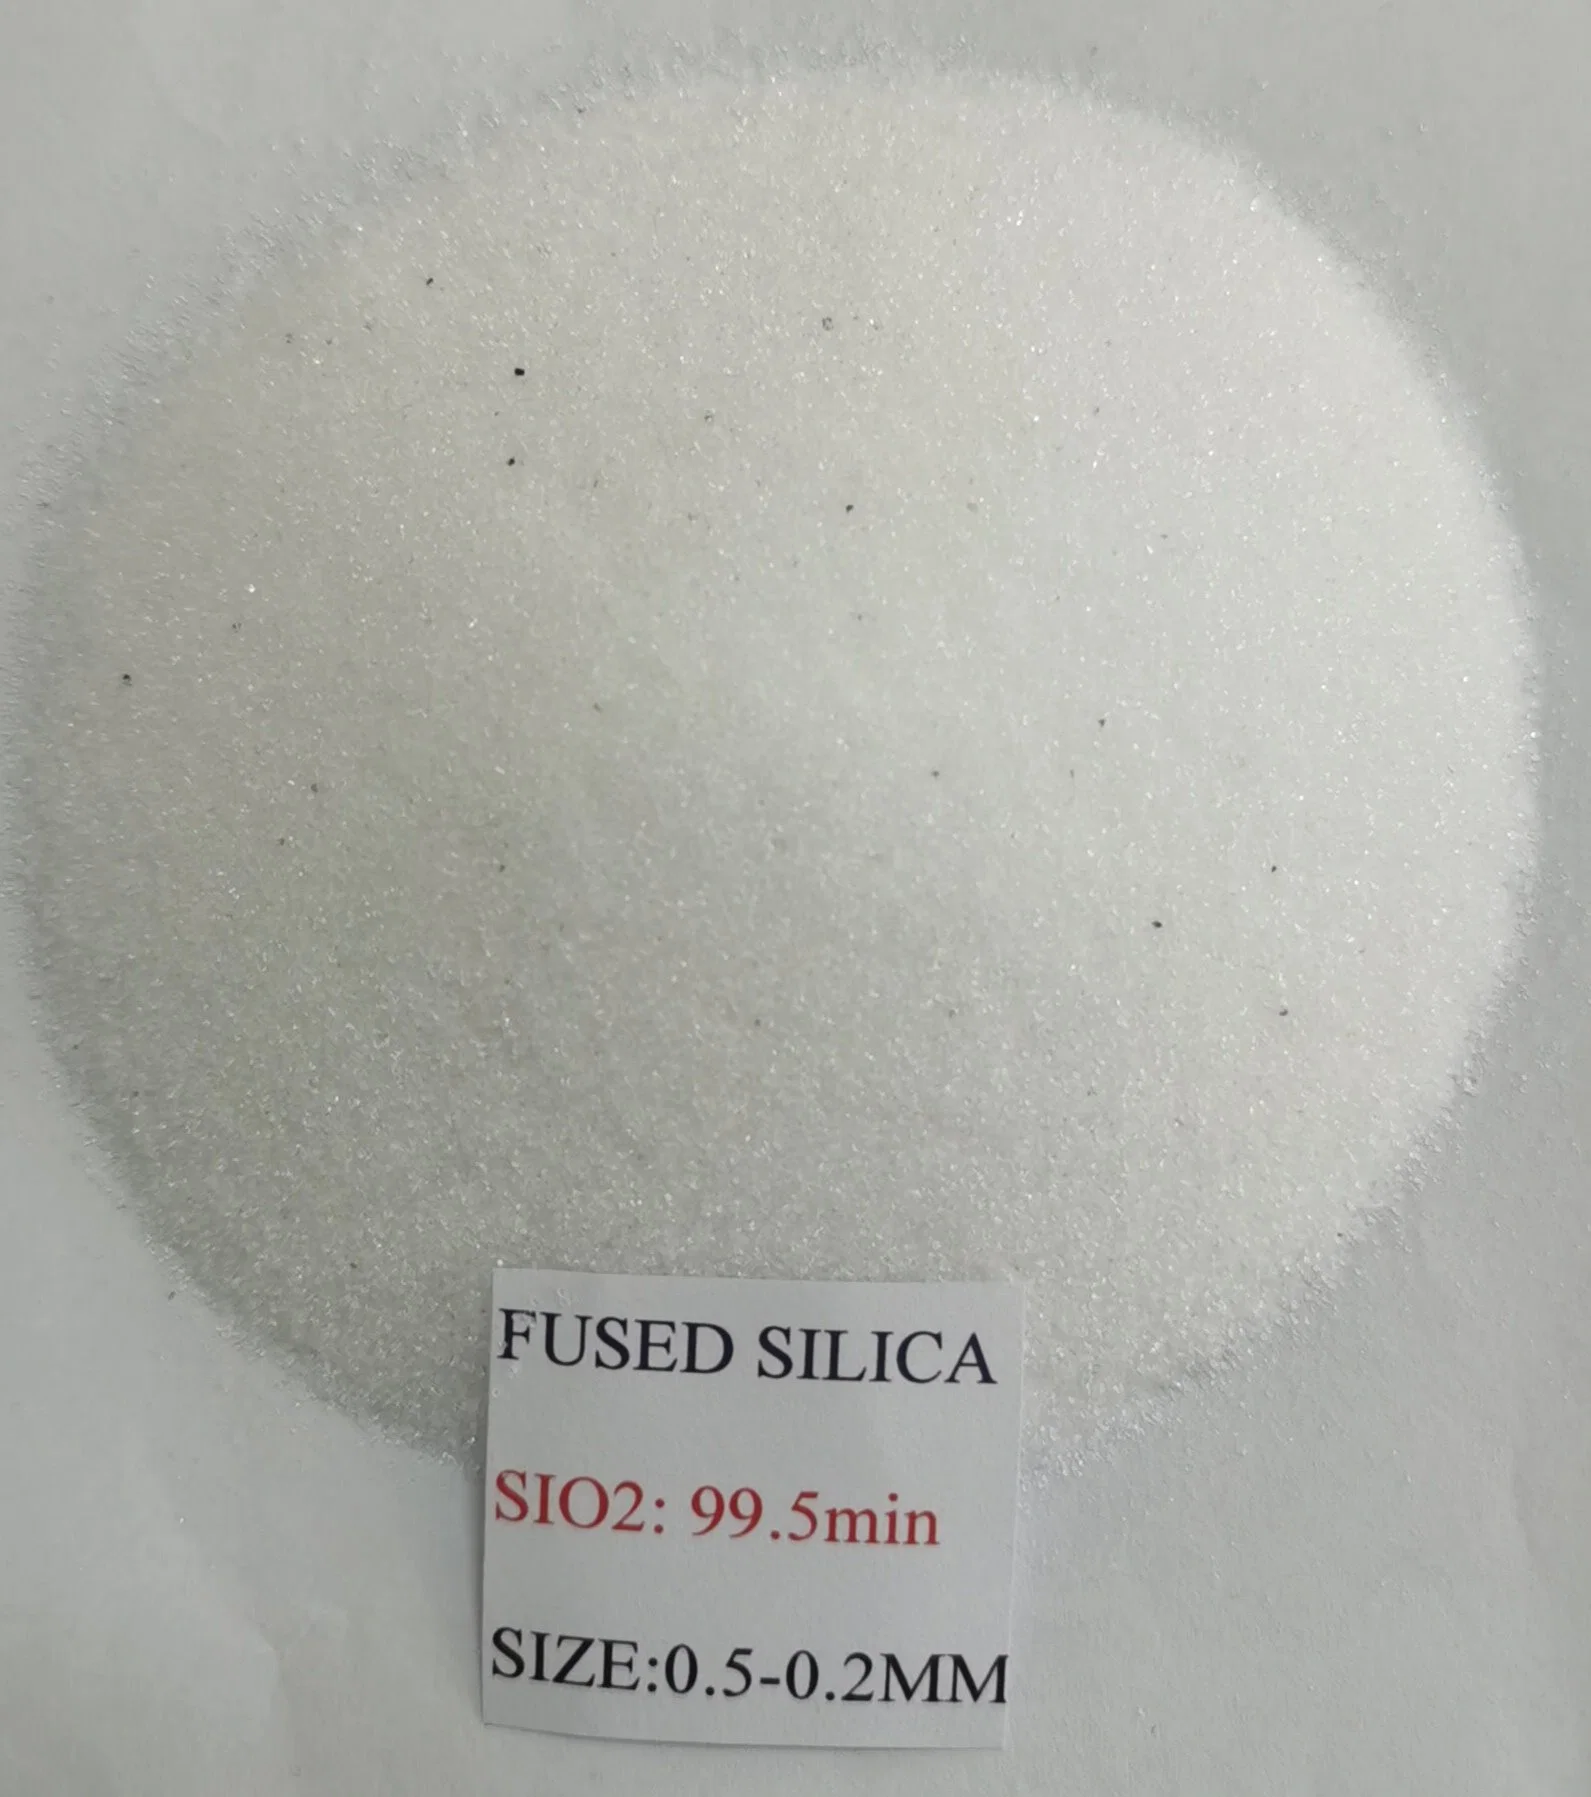 0.5-0.2mm Customized Fused Silica Sand with Sio2 99.8%